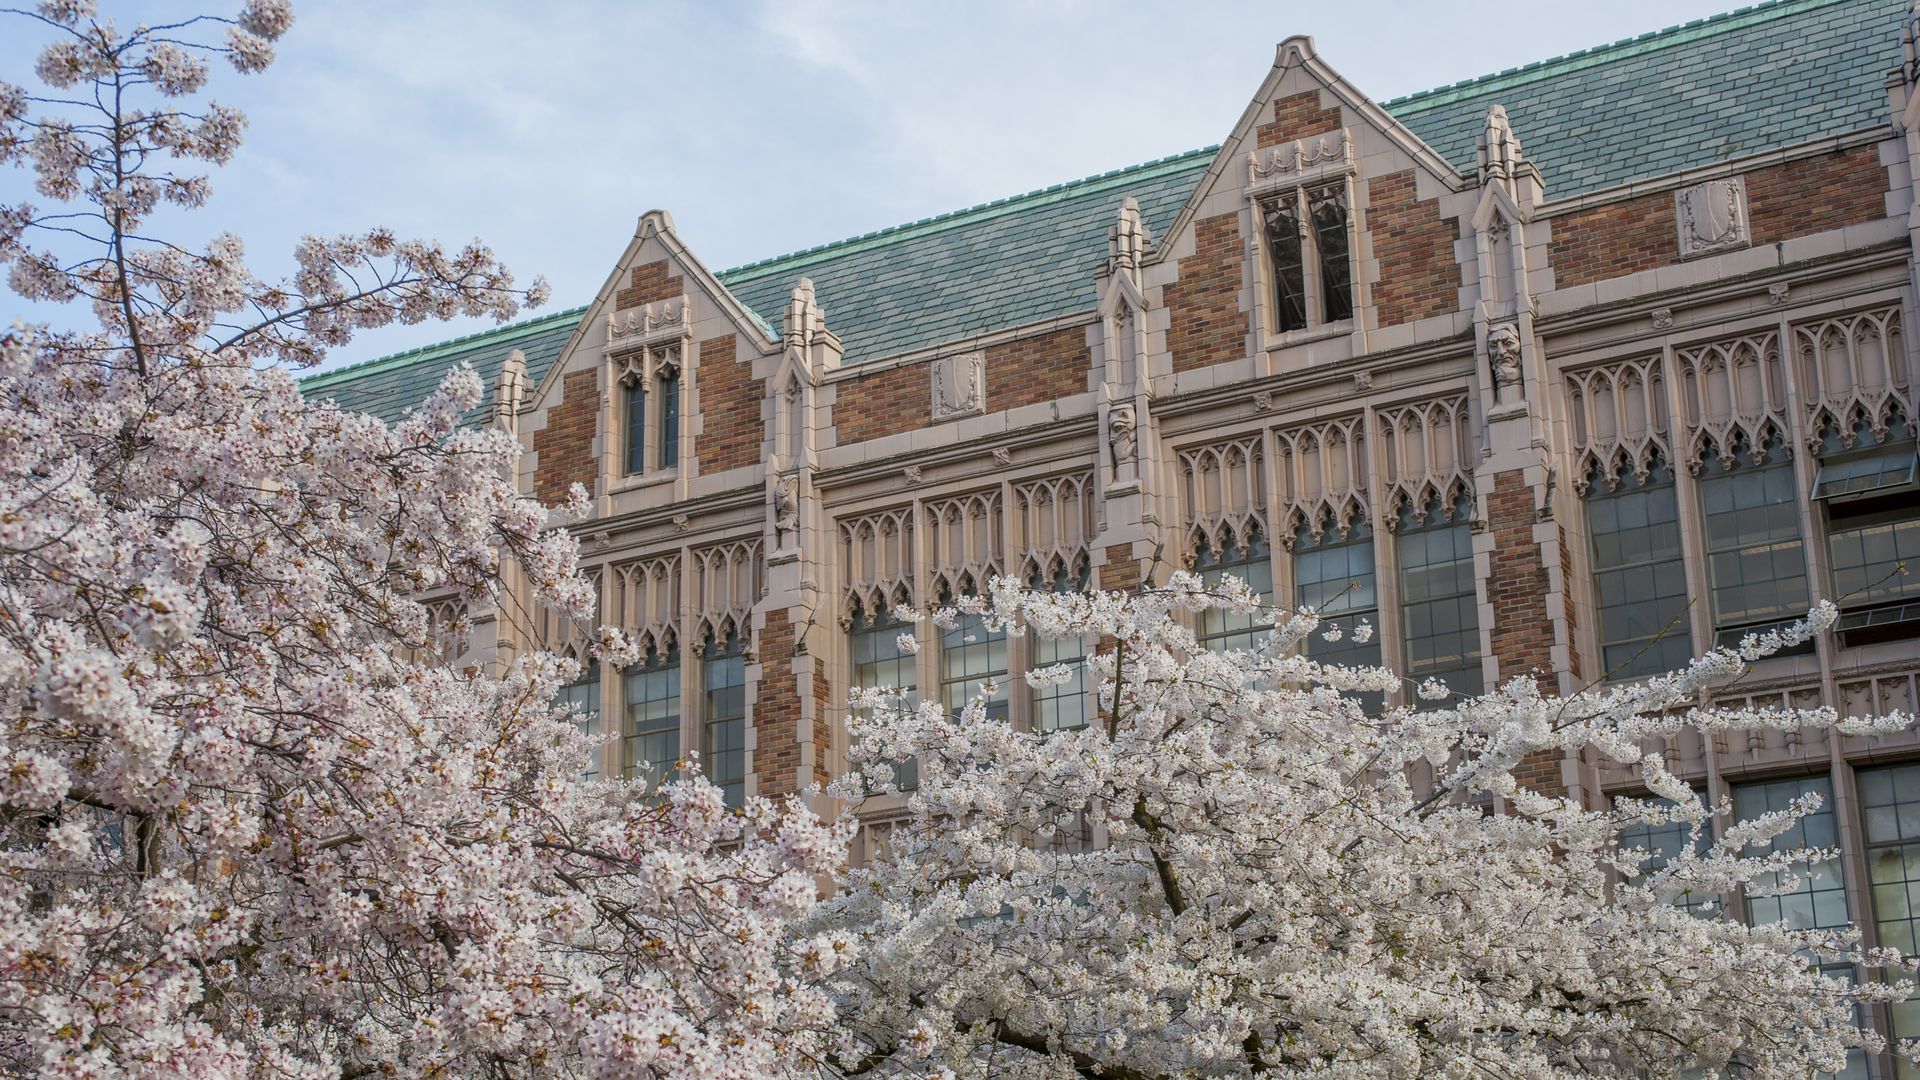 Flowering cherry trees in spring time at the Quad of the University of Washington in Seattle, Washington State, 